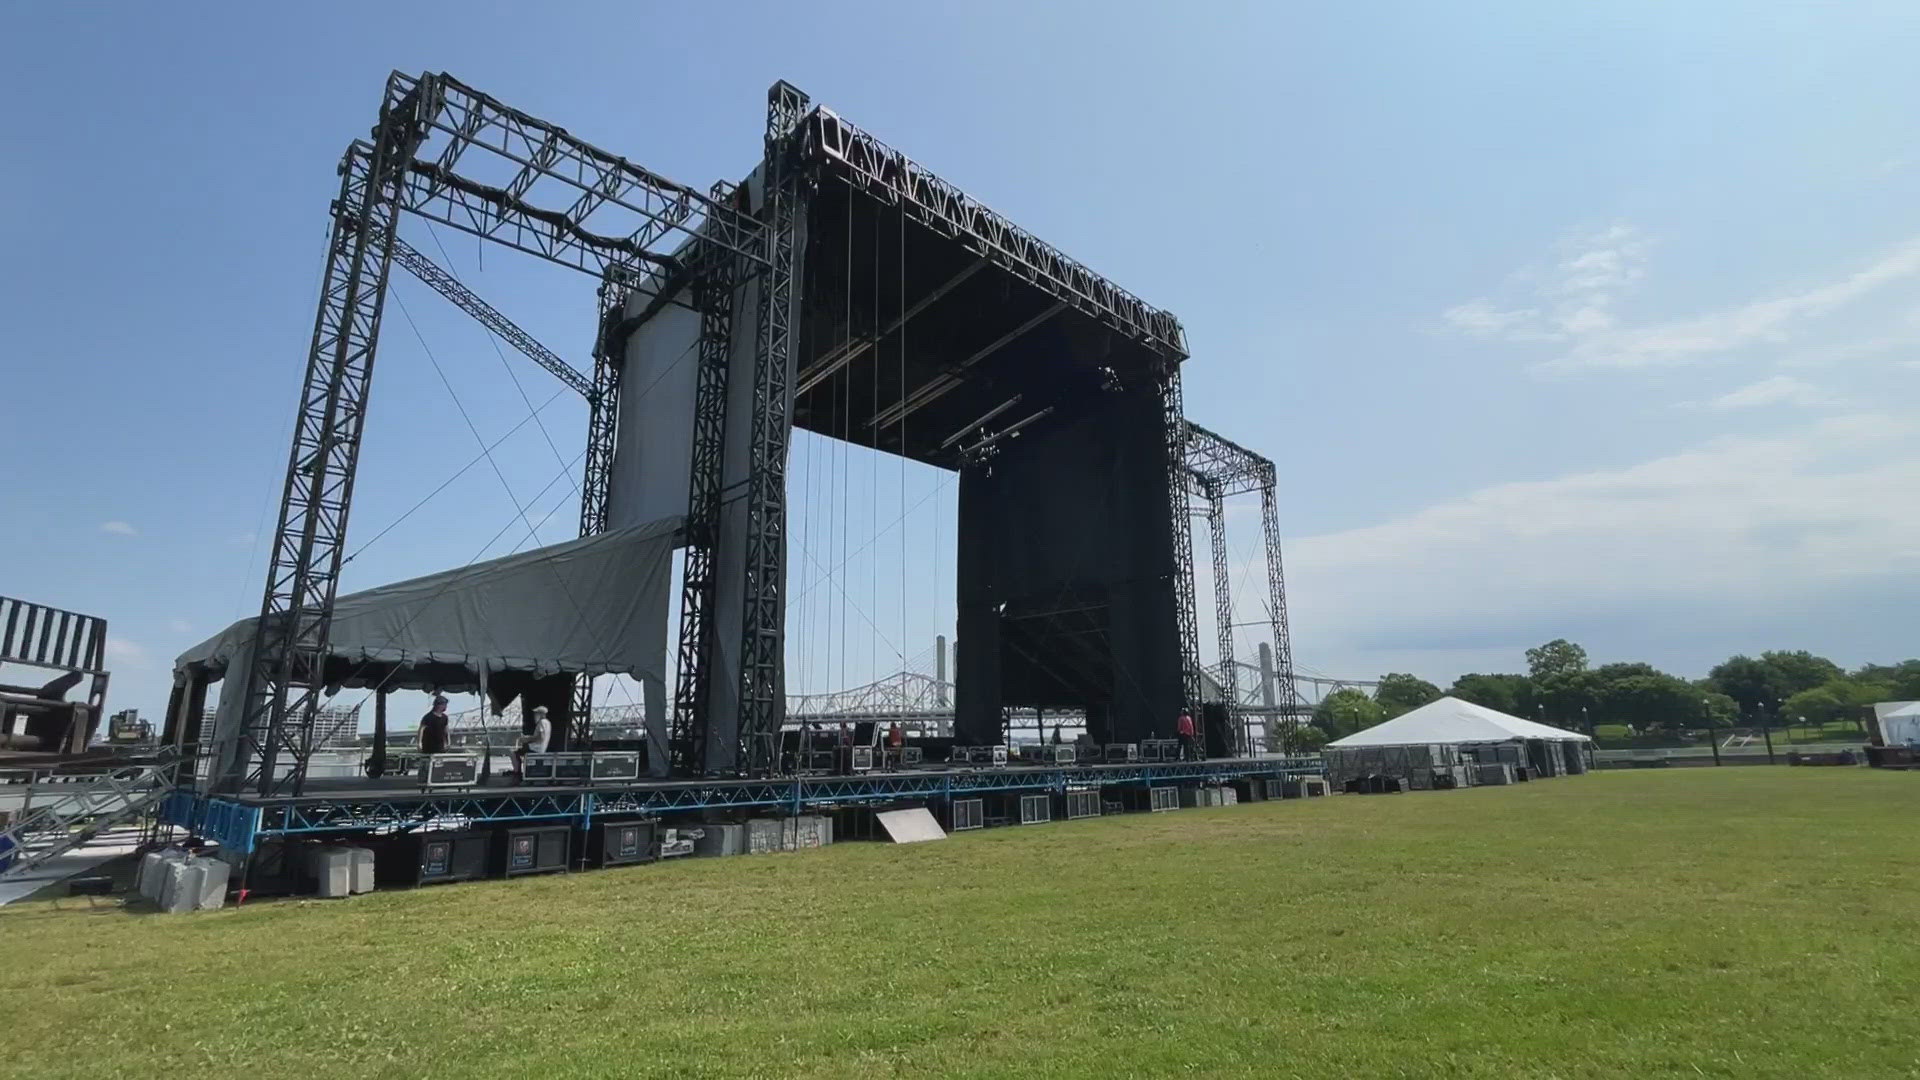 Live music will surround the Ohio River this weekend with two major festivals.